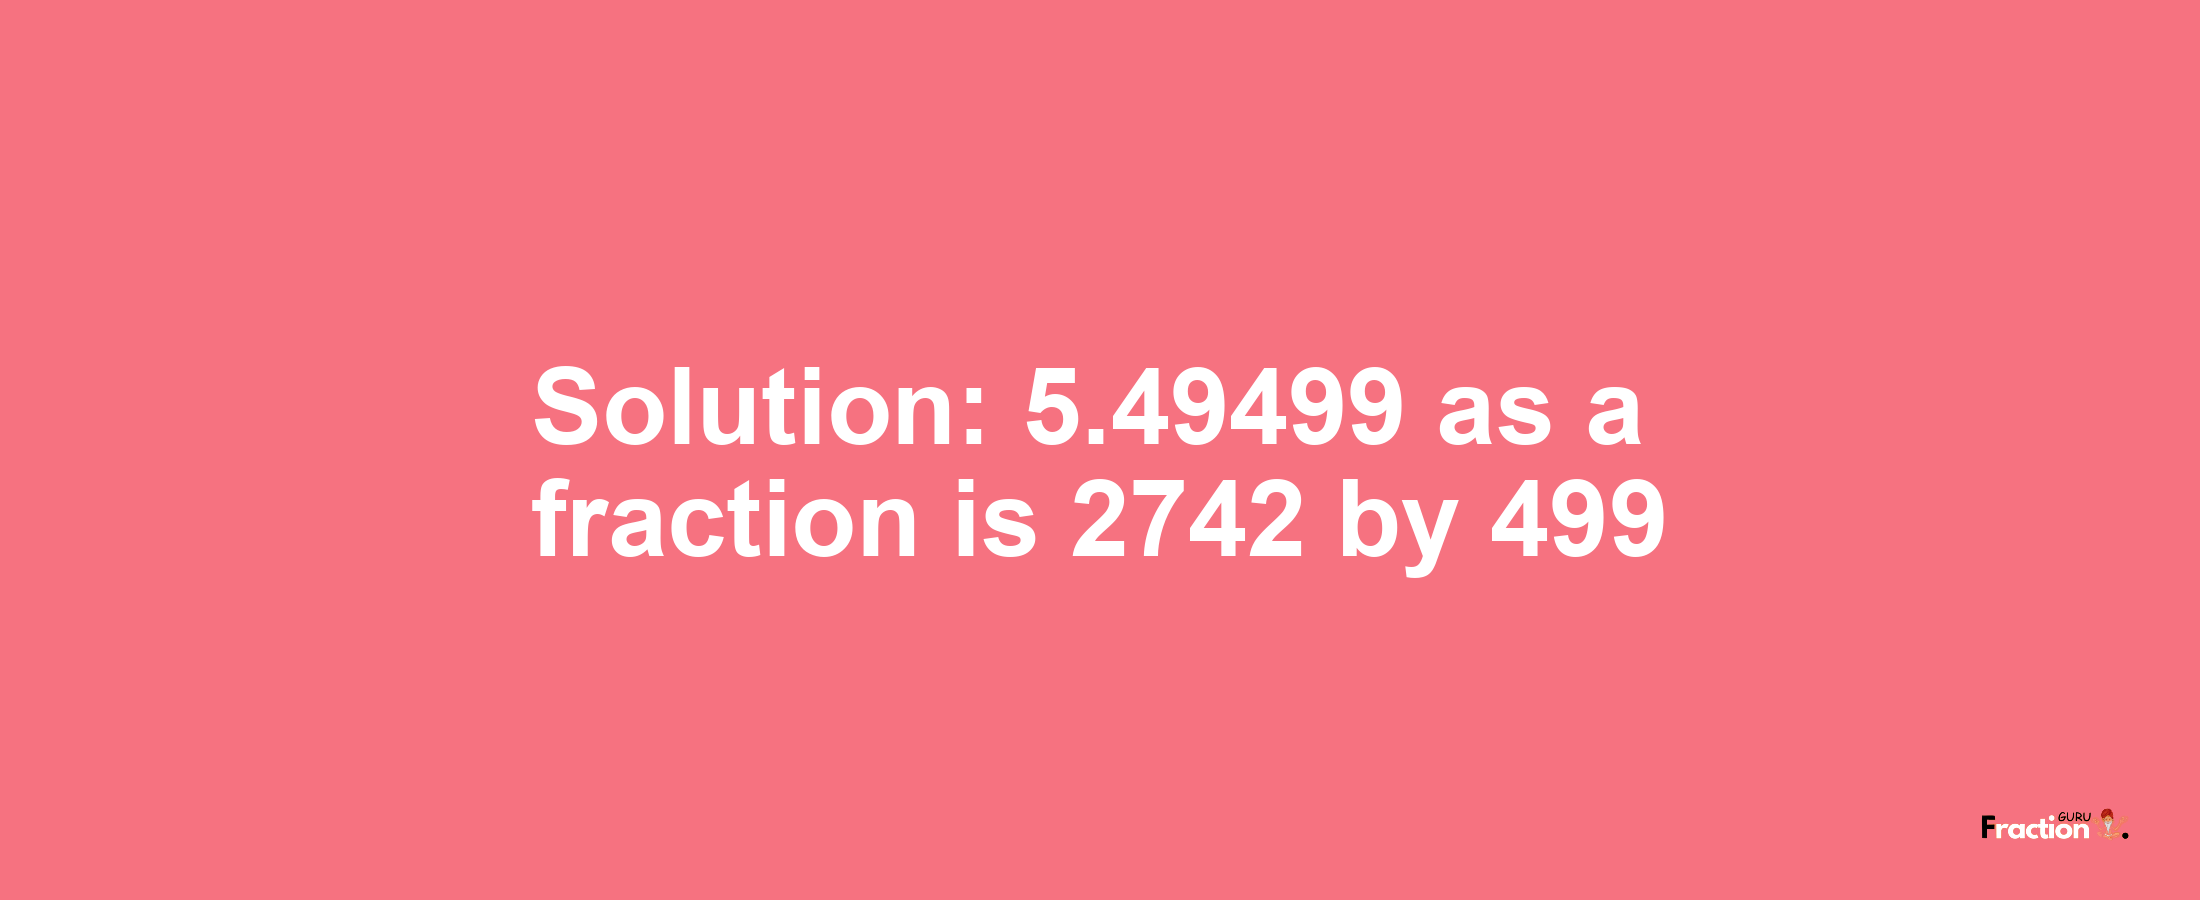 Solution:5.49499 as a fraction is 2742/499